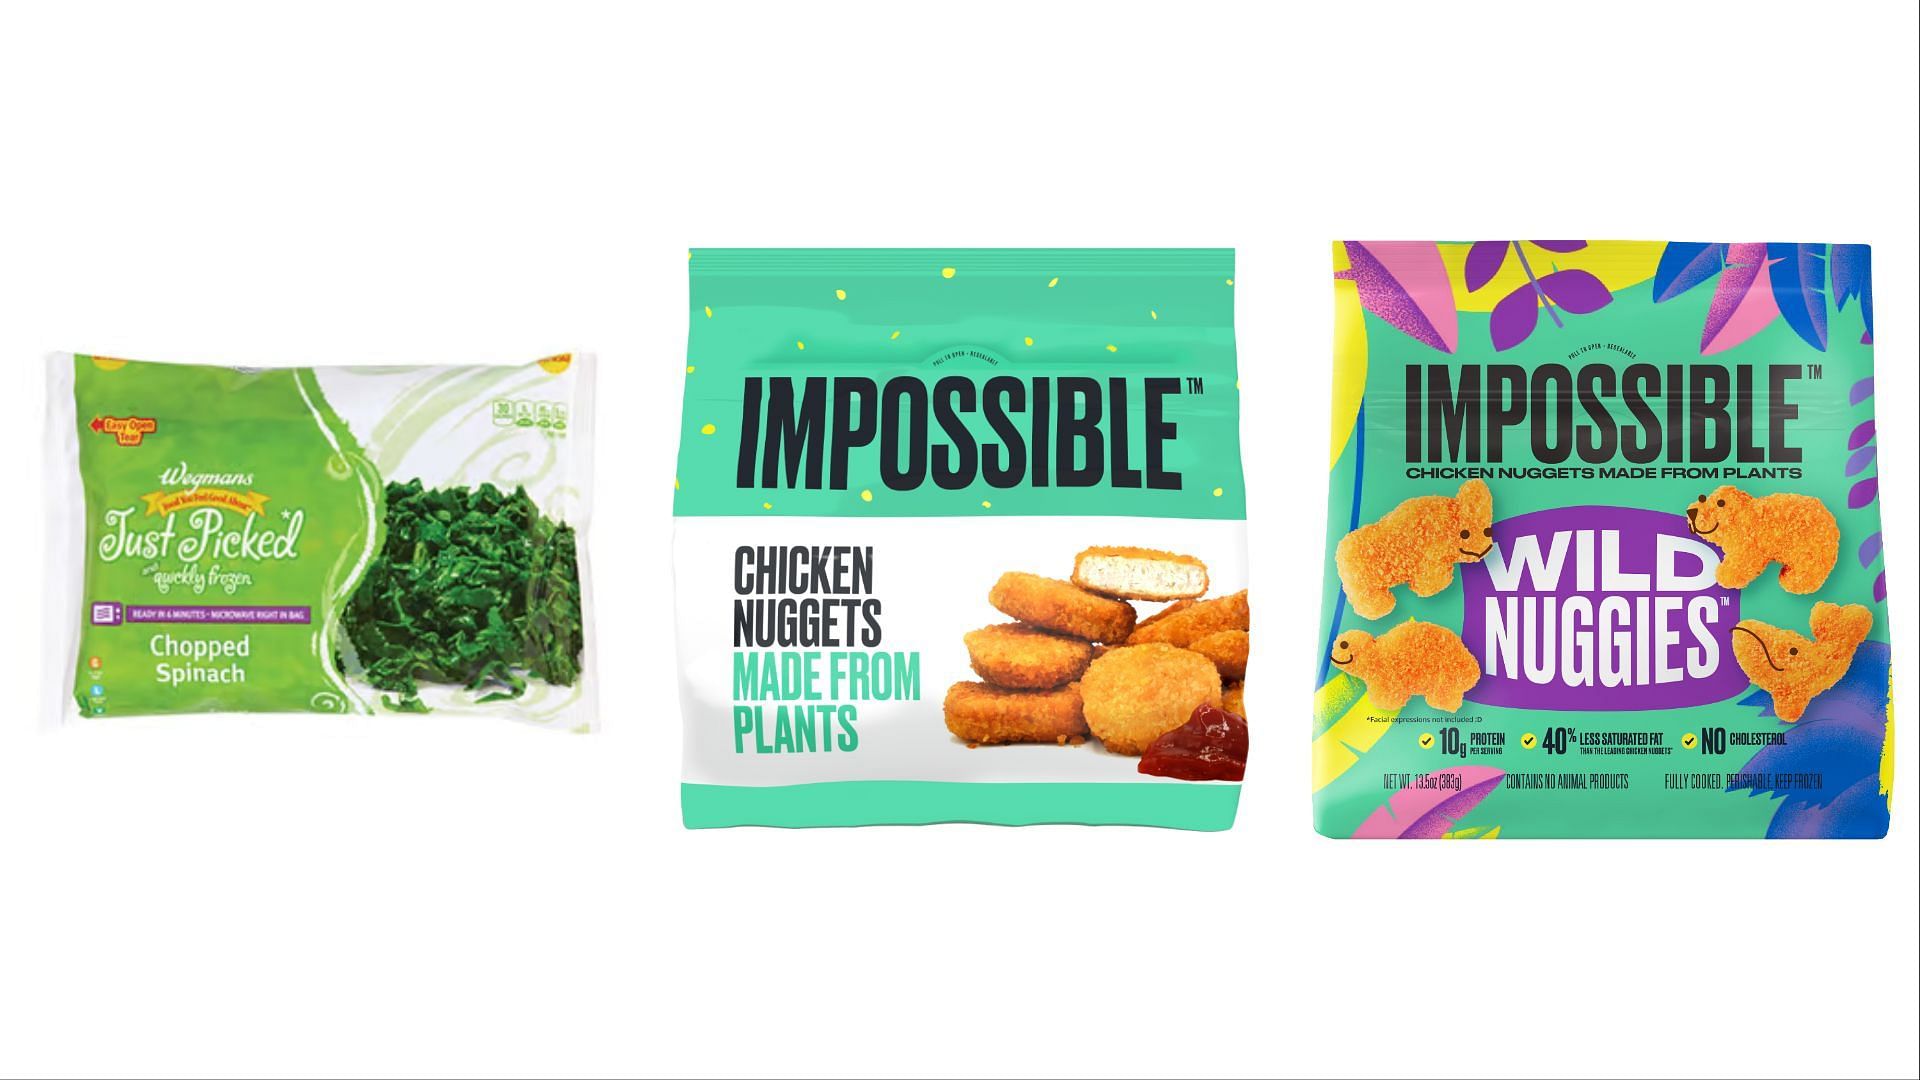 the frozen spinach and Impossible Chicken Nuggets &amp; Wild Nuggies are being recalled over potential contamination concerns (Image via Wegmans Food Market)